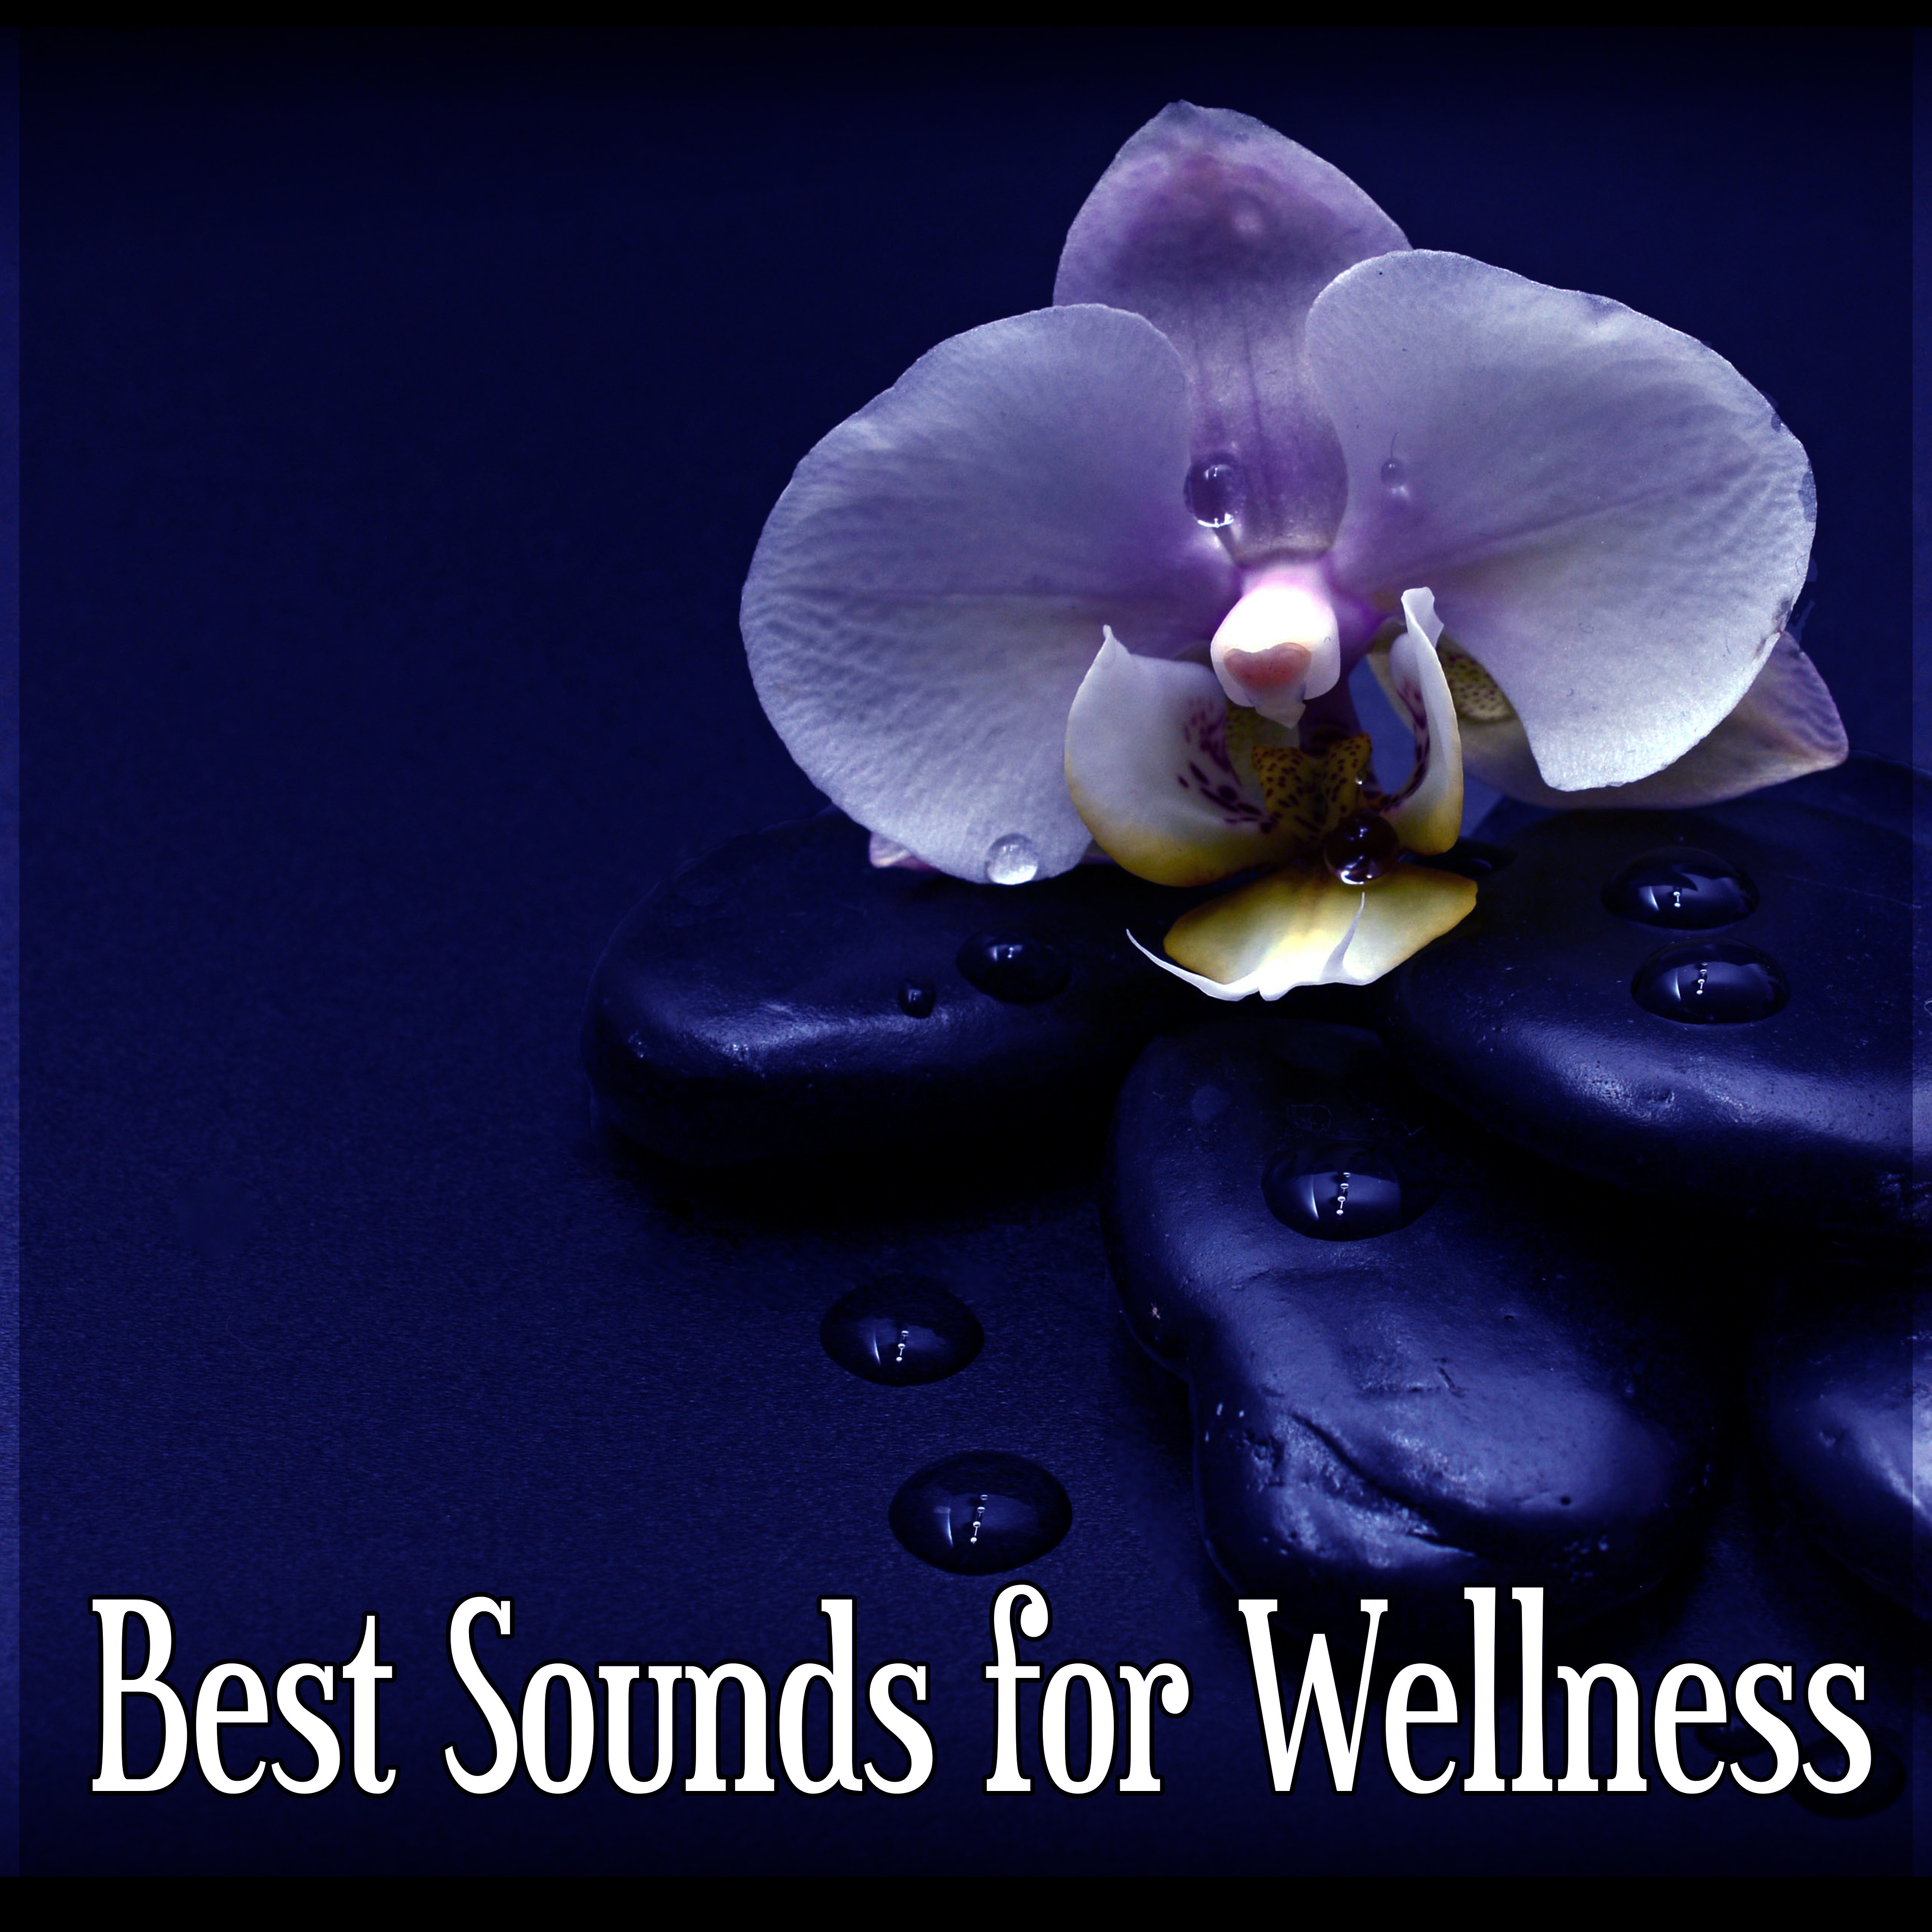 Best Sounds for Wellness – Calm Music for Meditation, Deep Sounds for Concentration, Psyhical Therapy, Natural White Noise, Sounds of Nature, Sensual Massage